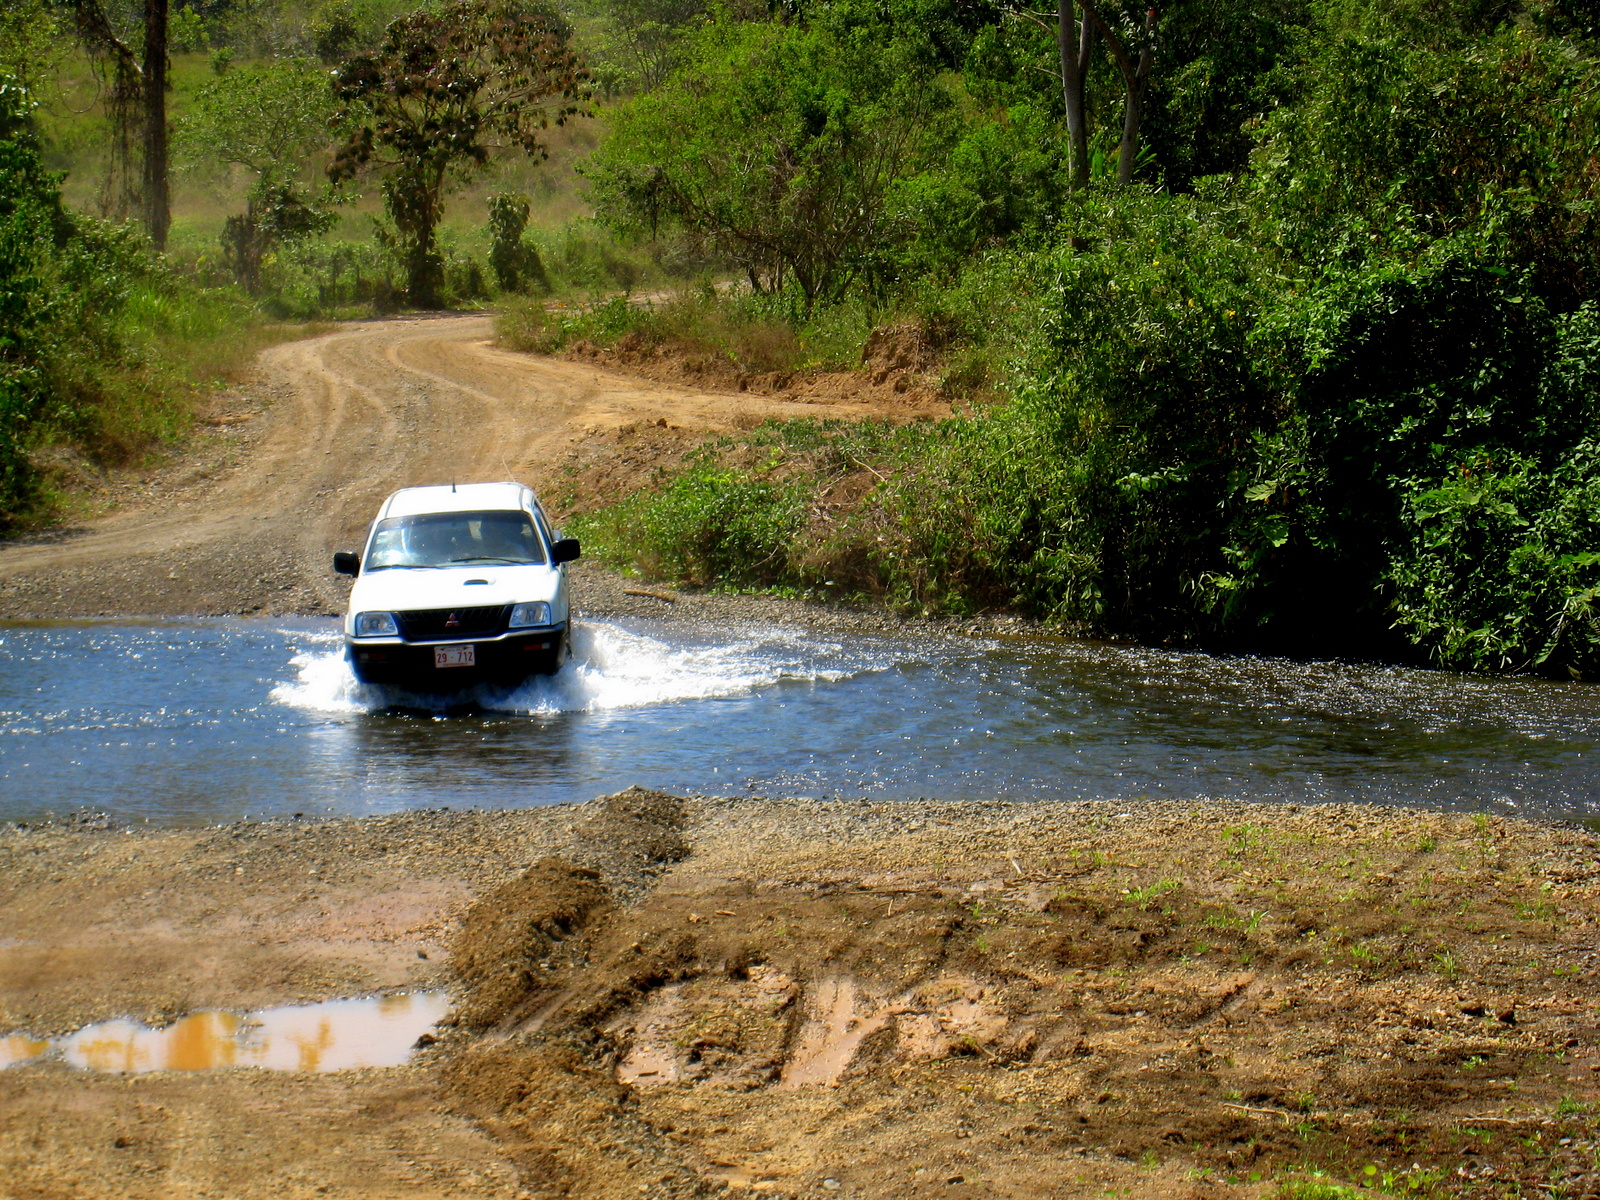 How Much is Car Insurance in Costa Rica?